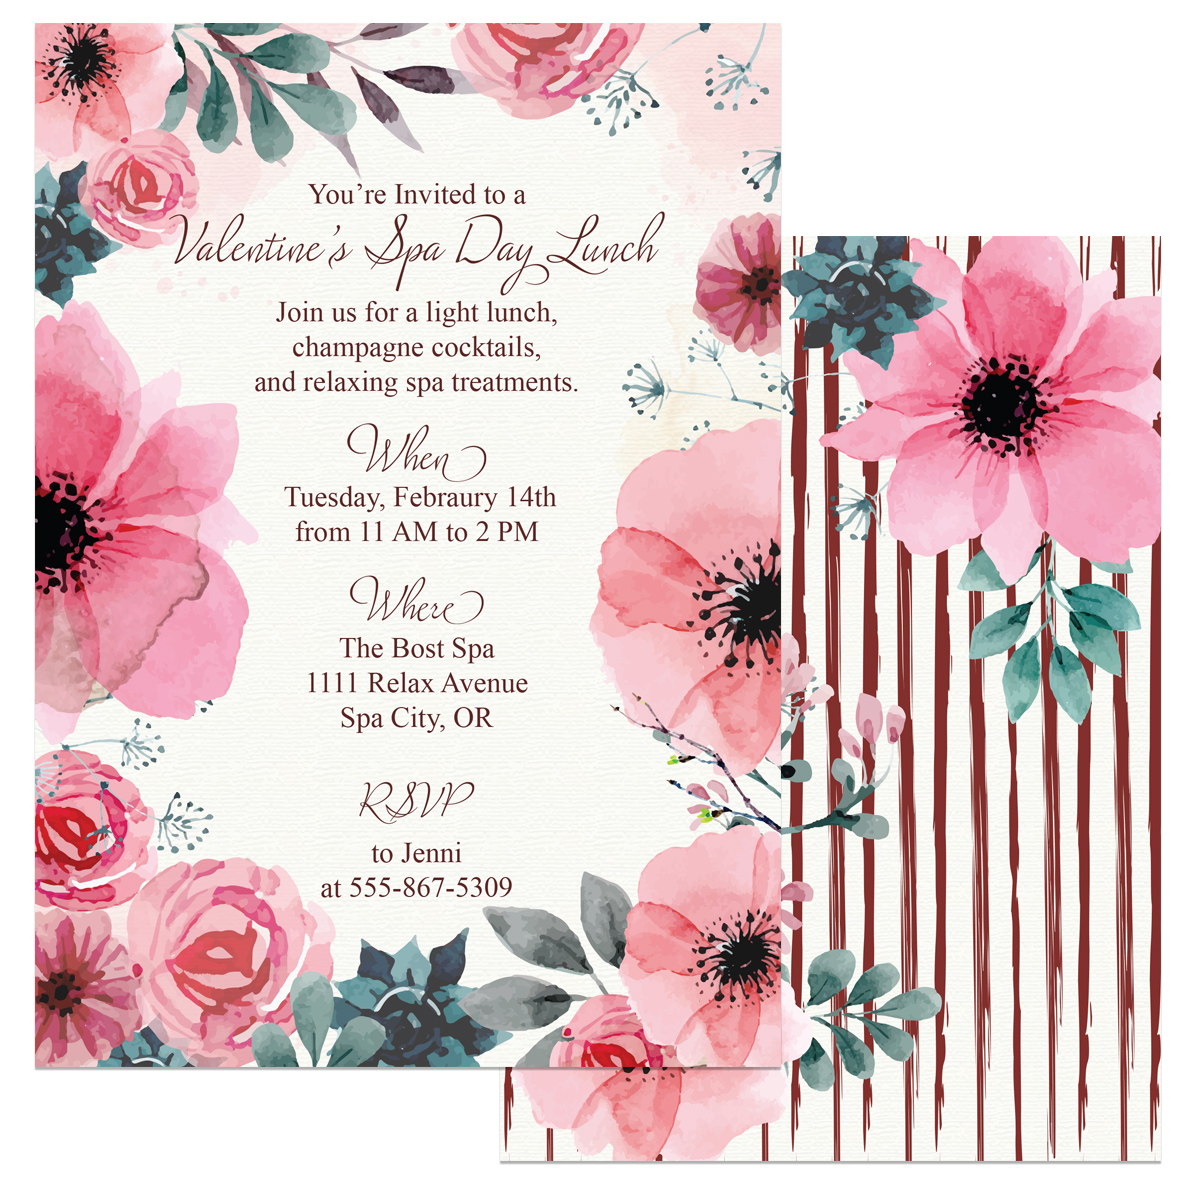 Valentines Day Spa Invitations - A Well Crafted Party